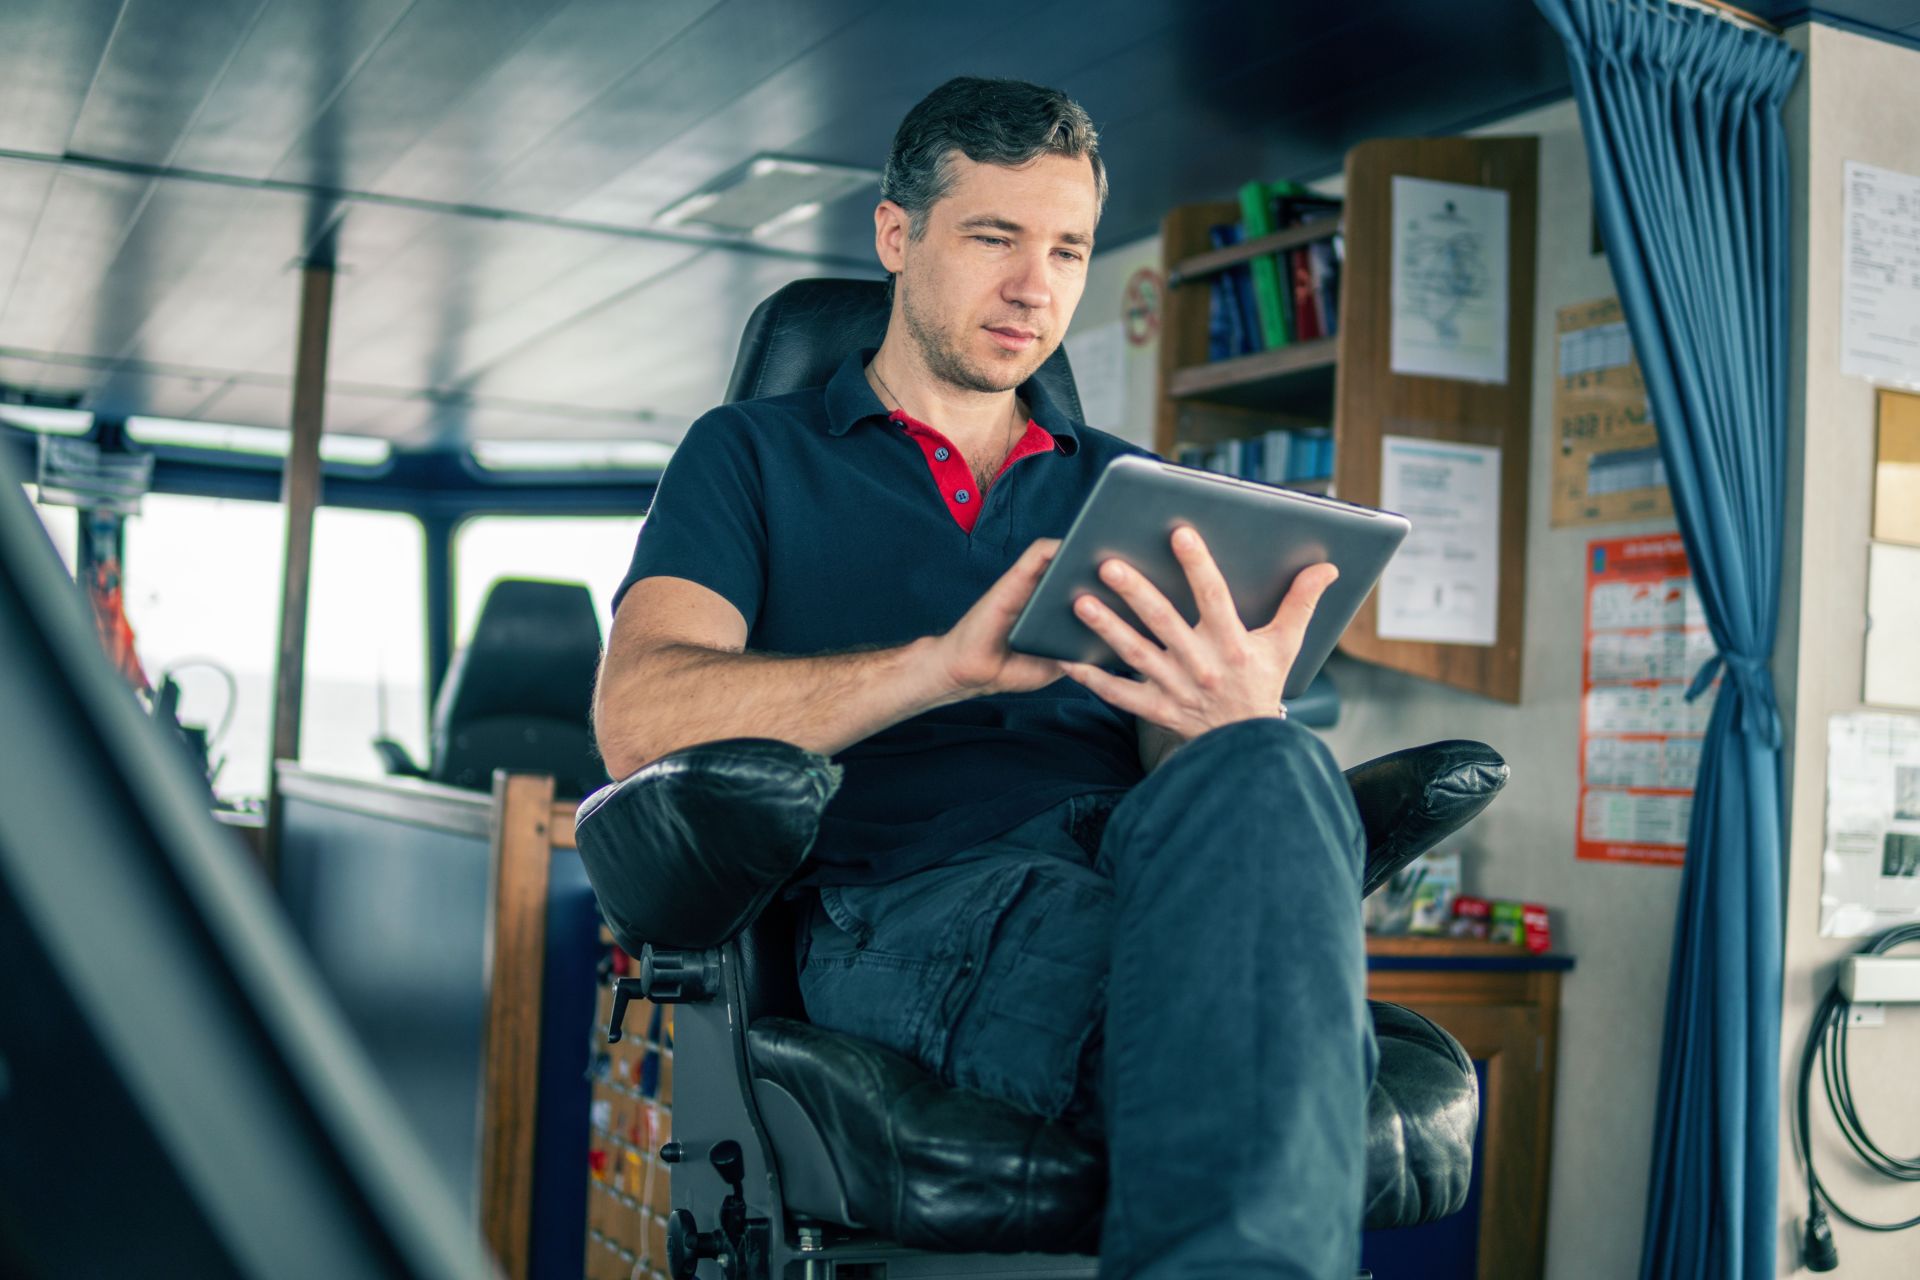 A seafarer in casual attire relaxes in a chair on the ship's bridge, deeply engrossed in reading or working on a tablet device.